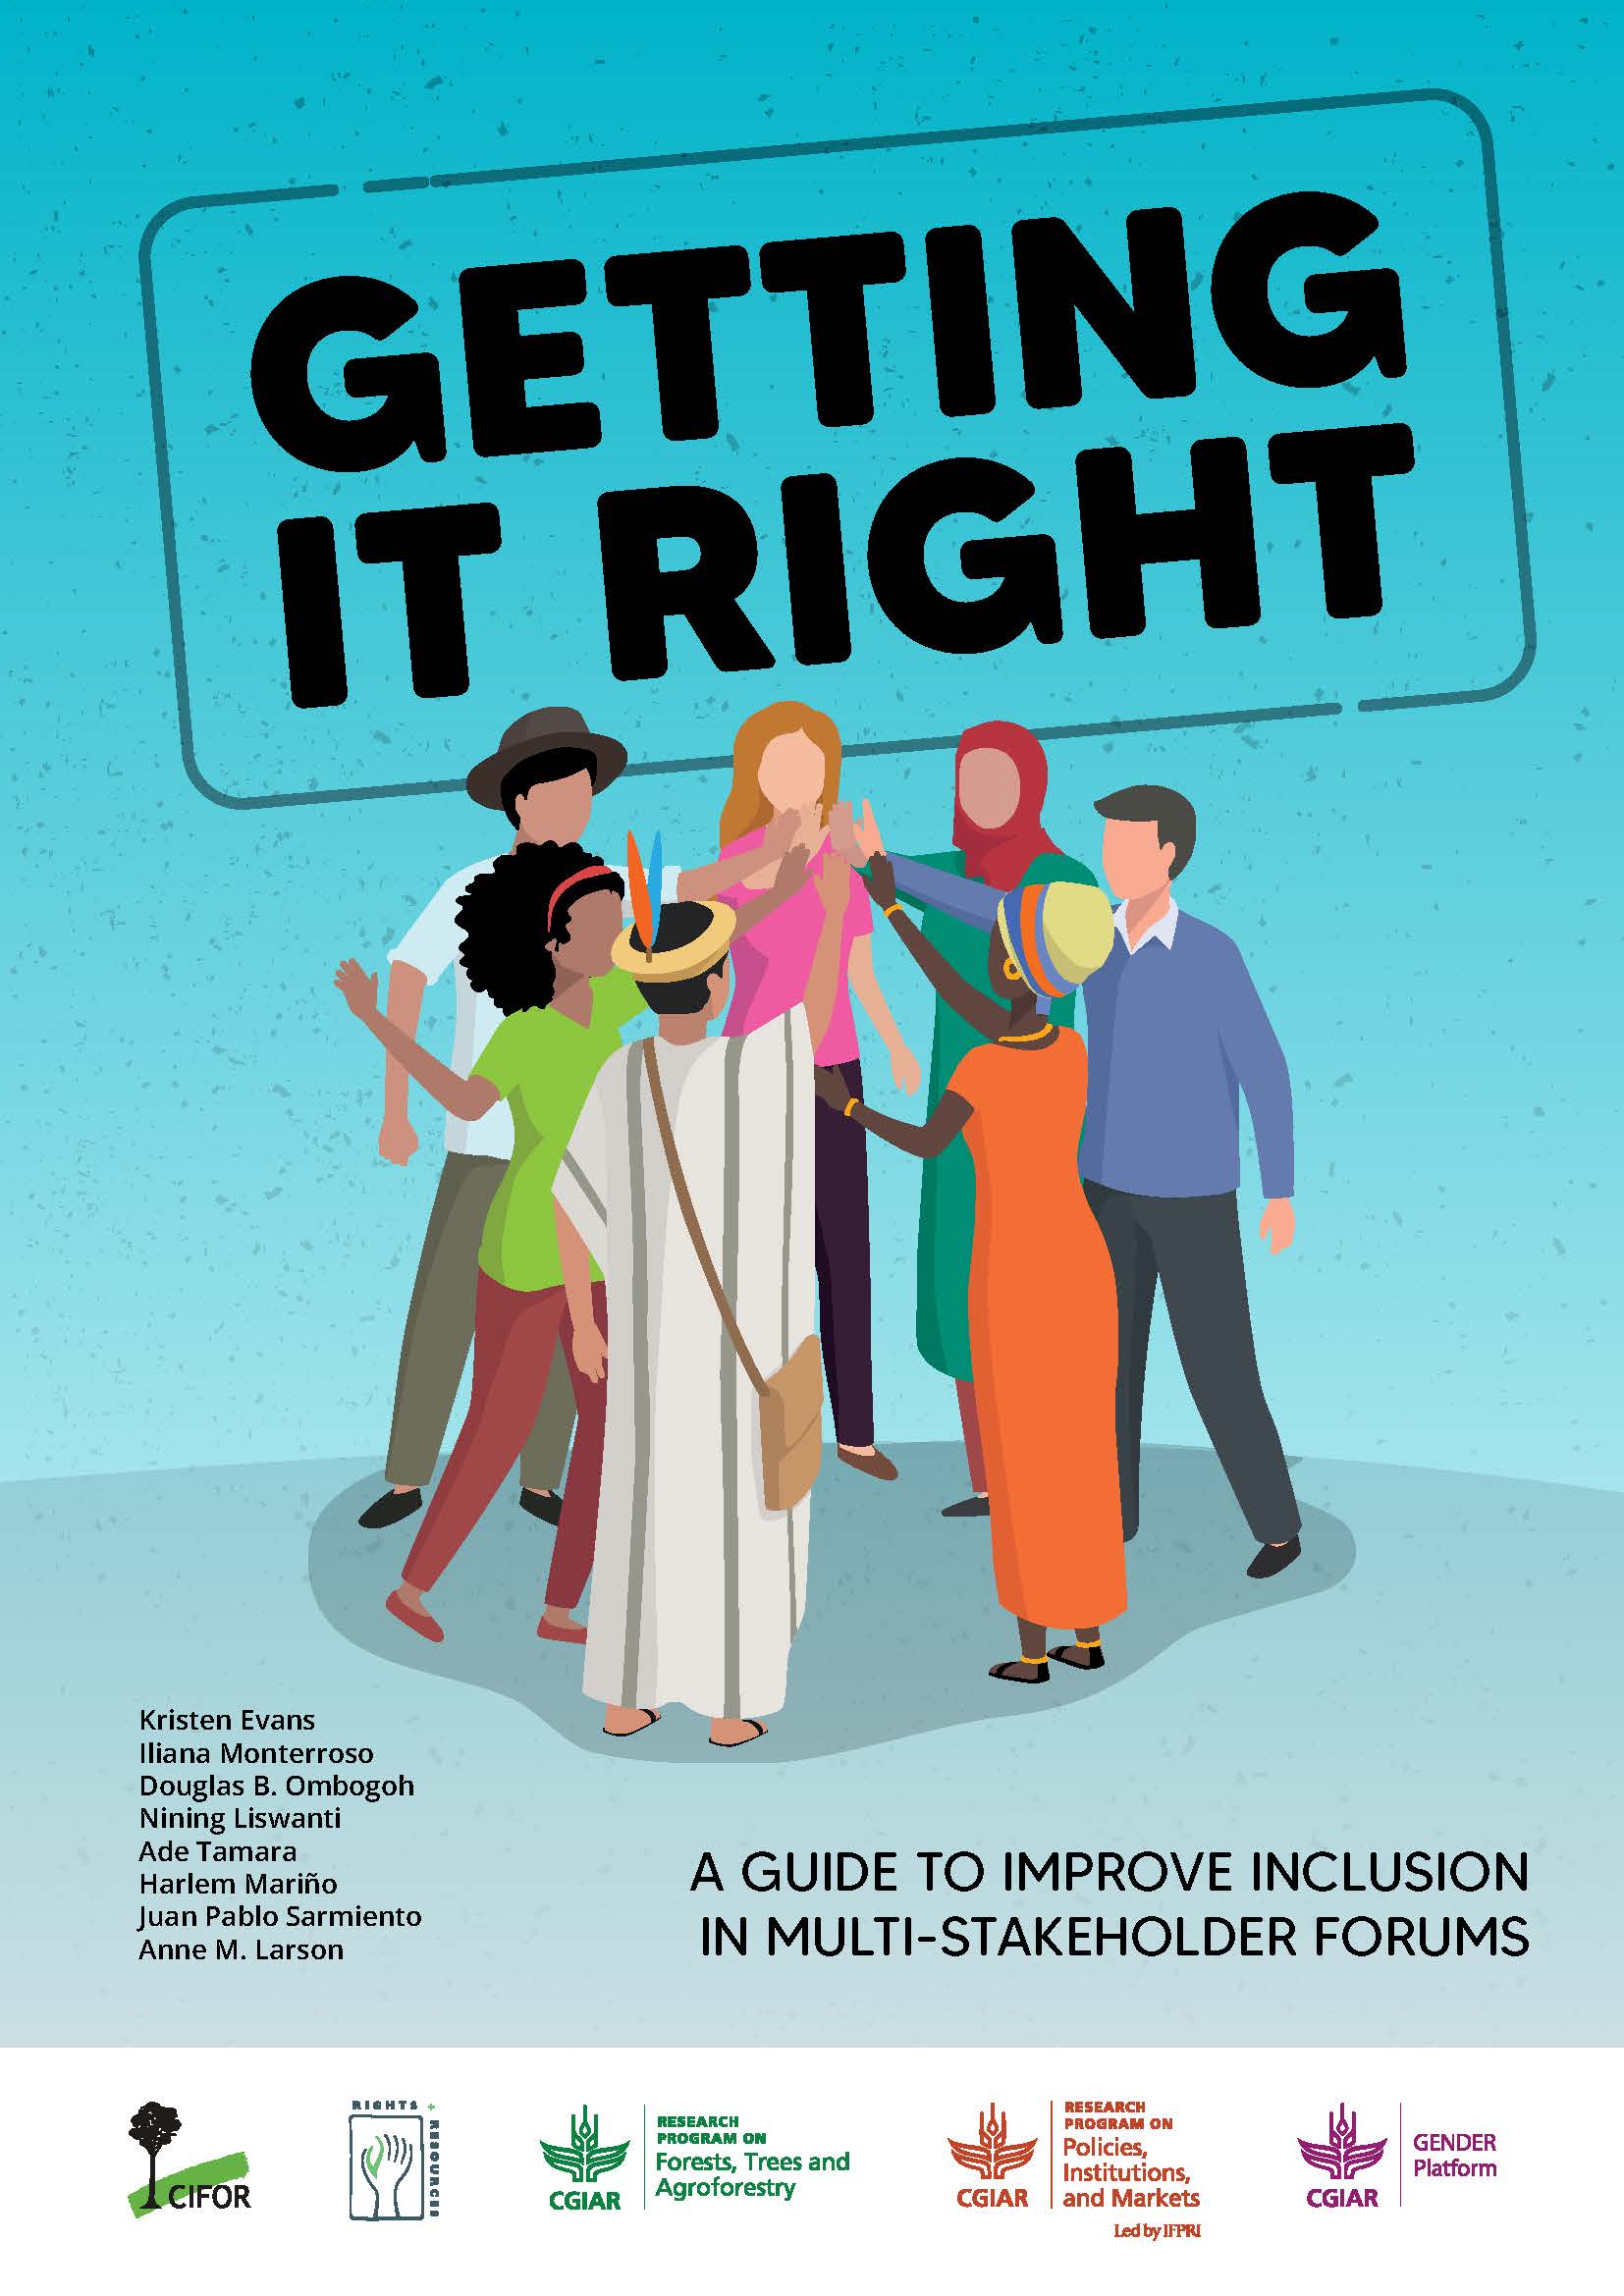 Getting it right, a guide to improve inclusion in multistakeholder forums